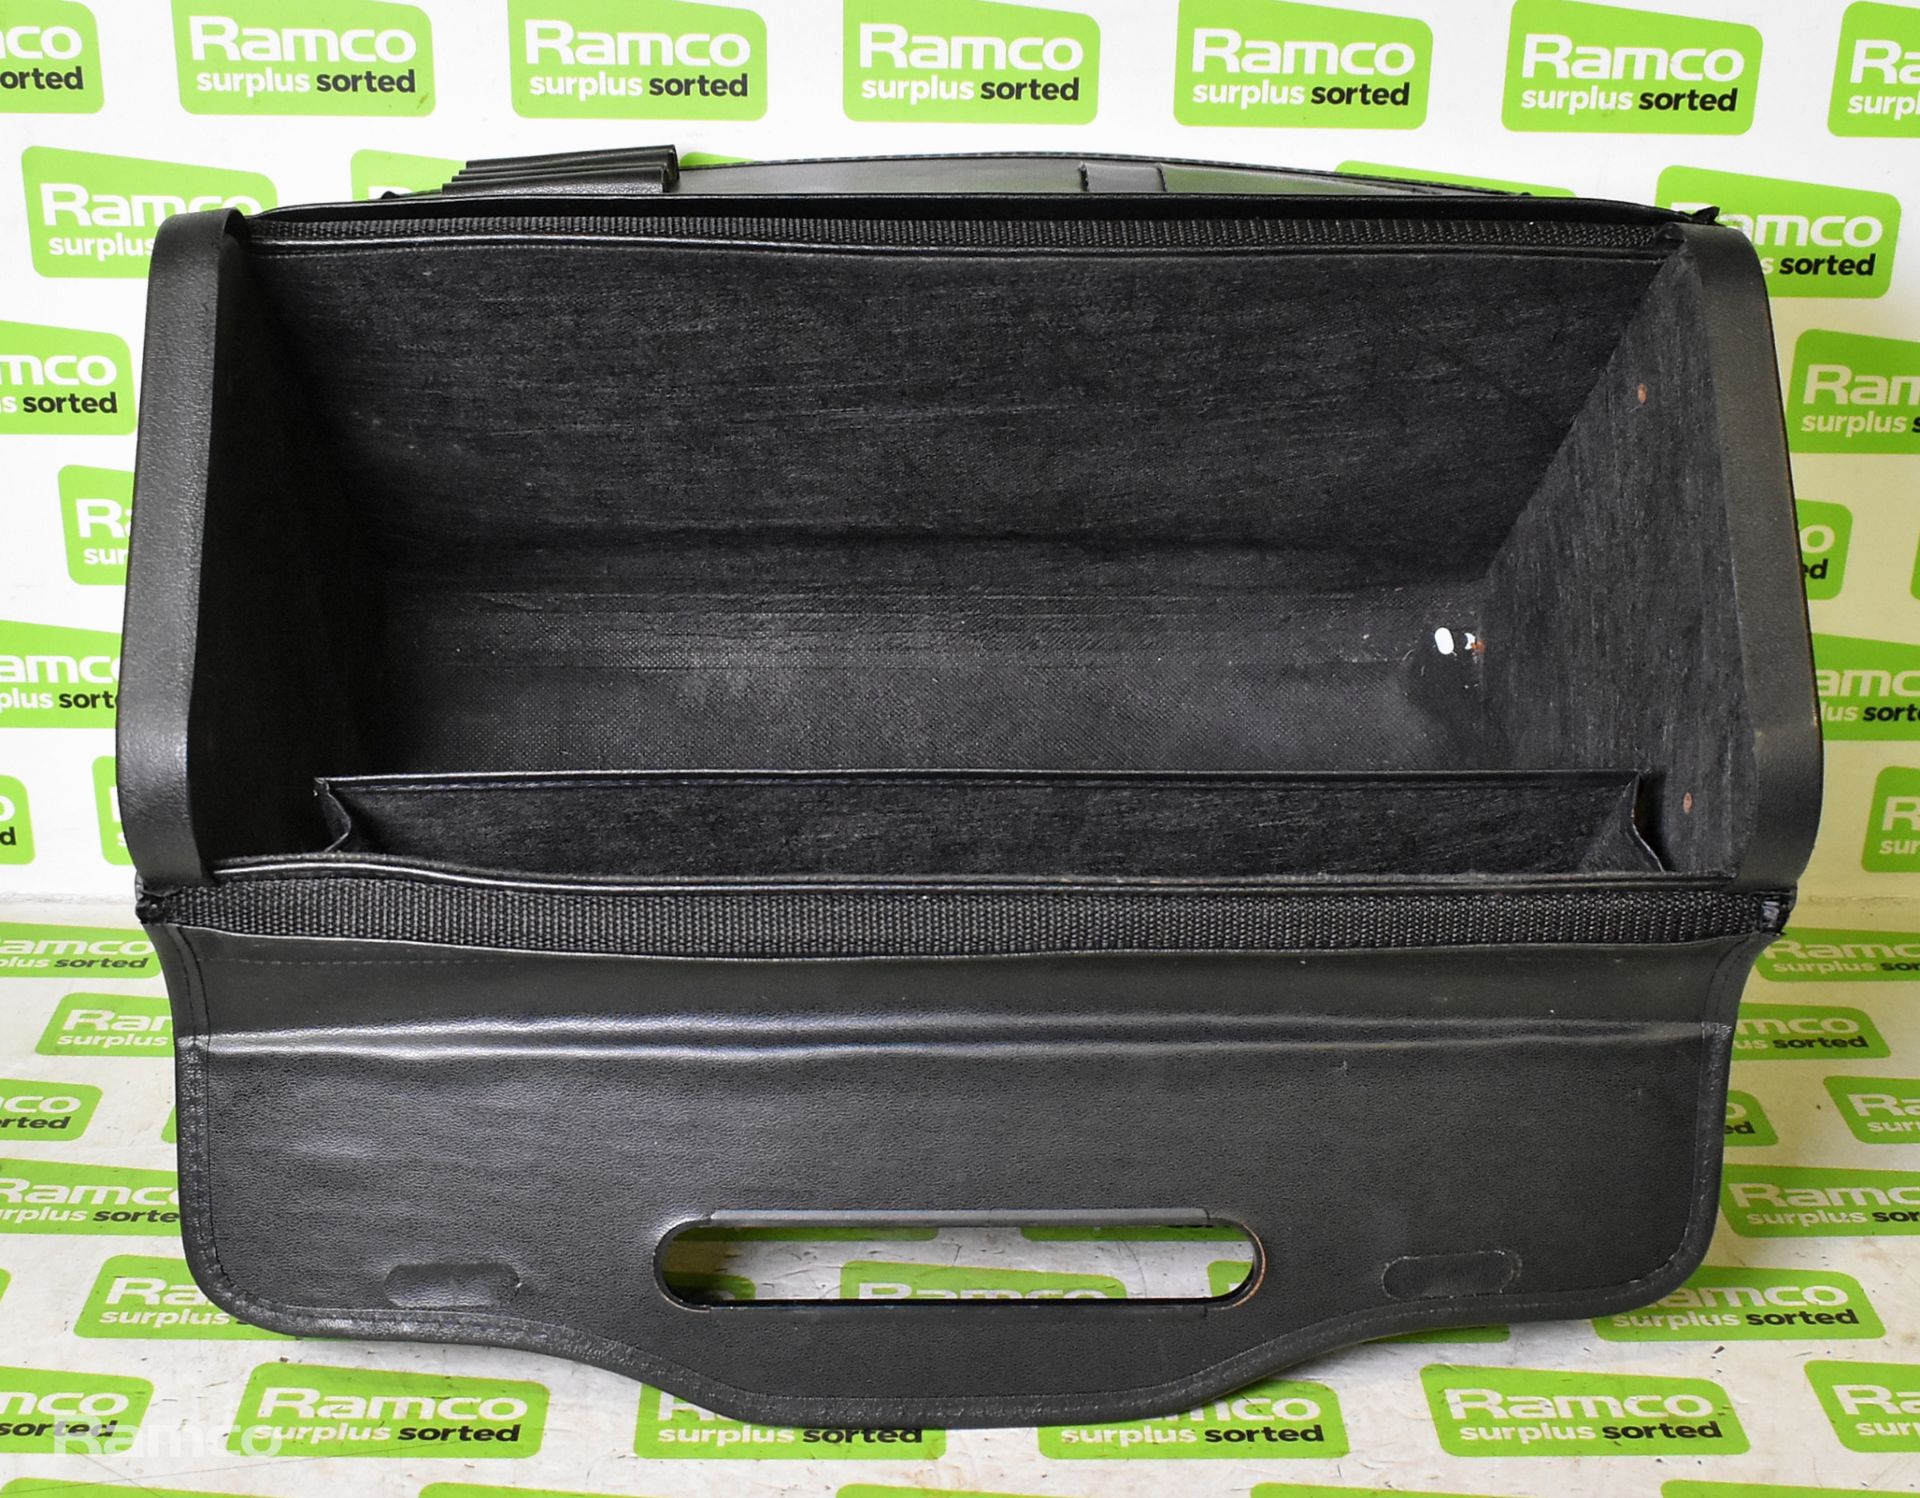 2x Black combination lock briefcases - W 460 x D 210 x H 350 mm - Image 4 of 6